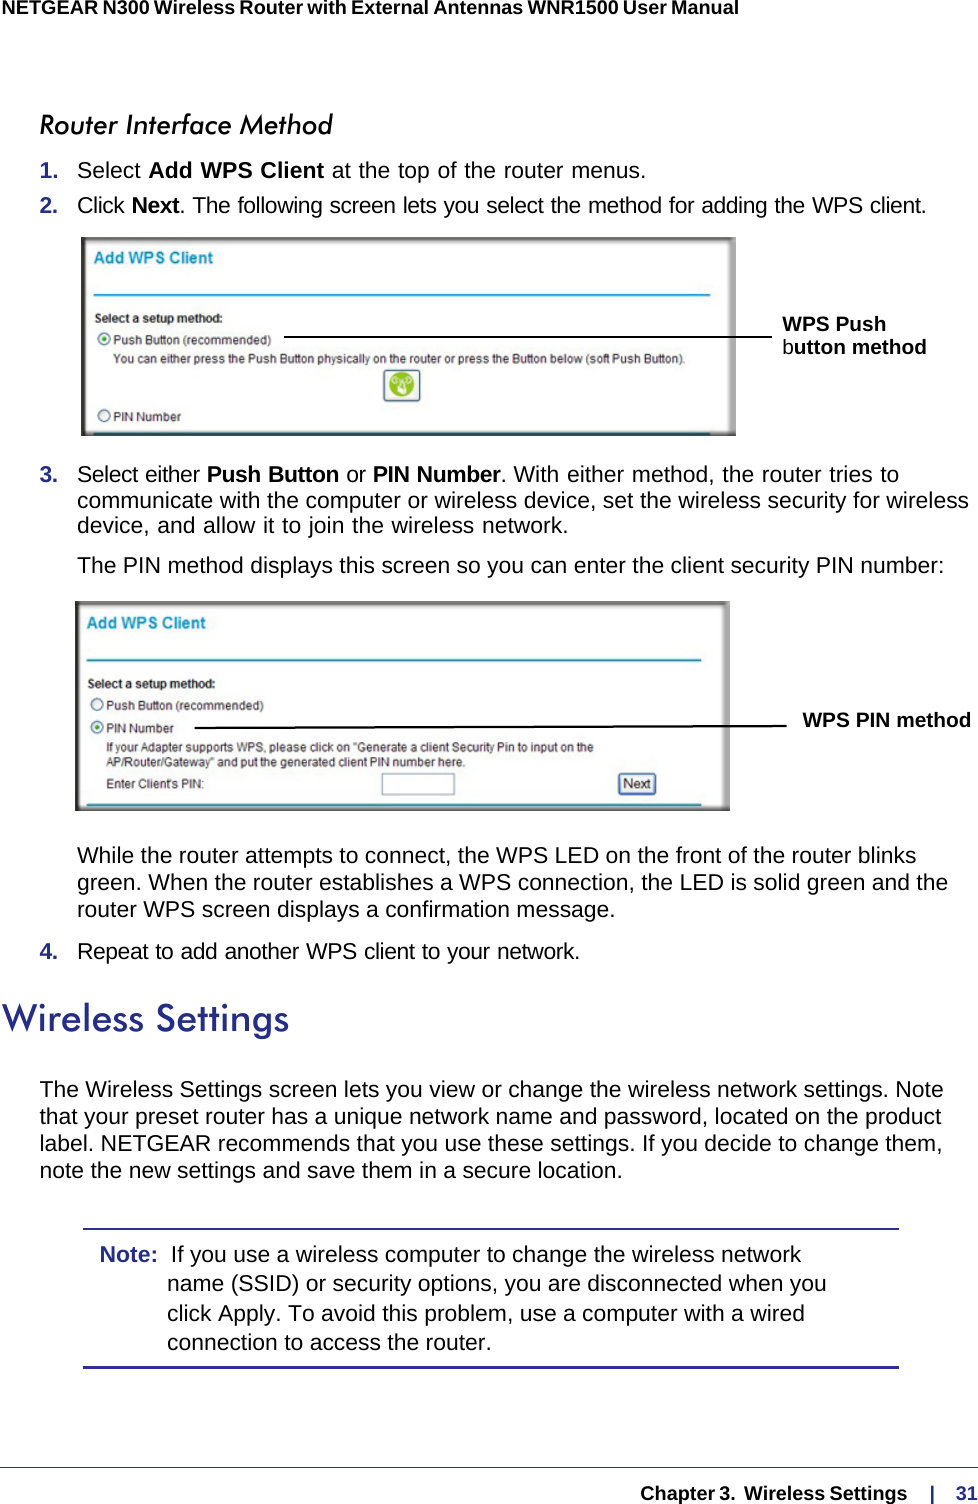   Chapter 3.  Wireless Settings     |    31NETGEAR N300 Wireless Router with External Antennas WNR1500 User Manual Router Interface Method1.  Select Add WPS Client at the top of the router menus. 2.  Click Next. The following screen lets you select the method for adding the WPS client.WPS Pushbutton method3.  Select either Push Button or PIN Number. With either method, the router tries to communicate with the computer or wireless device, set the wireless security for wireless device, and allow it to join the wireless network.The PIN method displays this screen so you can enter the client security PIN number:WPS PIN methodWhile the router attempts to connect, the WPS LED on the front of the router blinks green. When the router establishes a WPS connection, the LED is solid green and the router WPS screen displays a confirmation message. 4.  Repeat to add another WPS client to your network.Wireless SettingsThe Wireless Settings screen lets you view or change the wireless network settings. Note that your preset router has a unique network name and password, located on the product label. NETGEAR recommends that you use these settings. If you decide to change them, note the new settings and save them in a secure location.Note:  If you use a wireless computer to change the wireless network name (SSID) or security options, you are disconnected when you click Apply. To avoid this problem, use a computer with a wired connection to access the router.